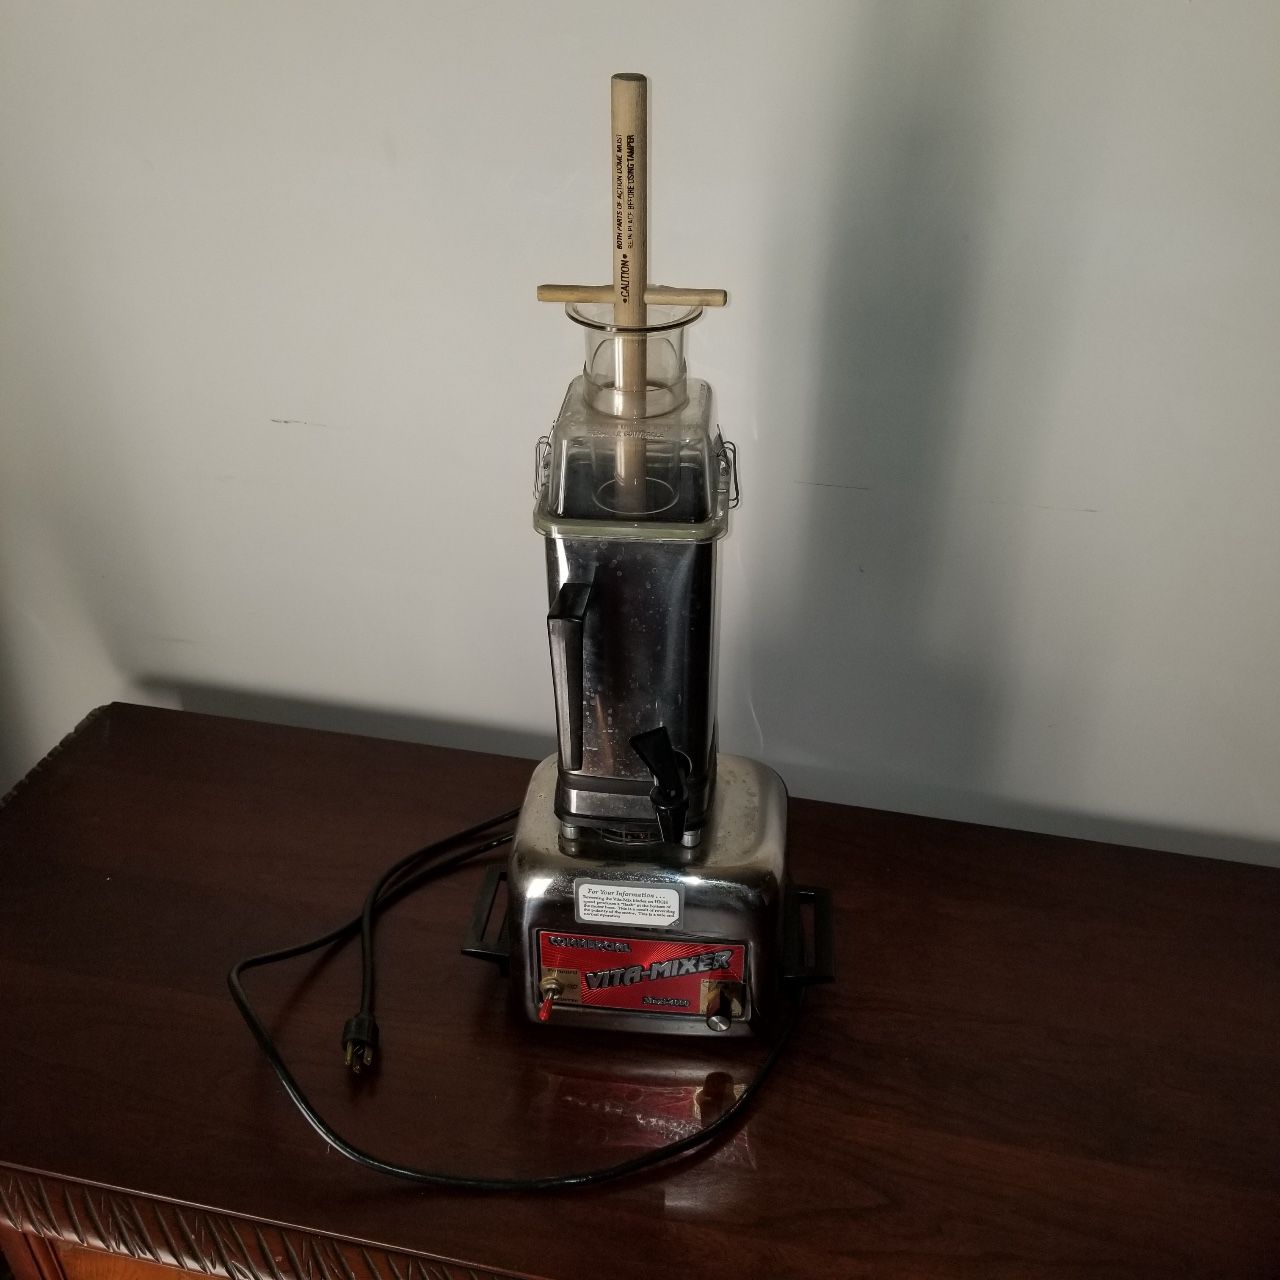 Stainless Steel Vitamix for Sale in Whittier, CA - OfferUp